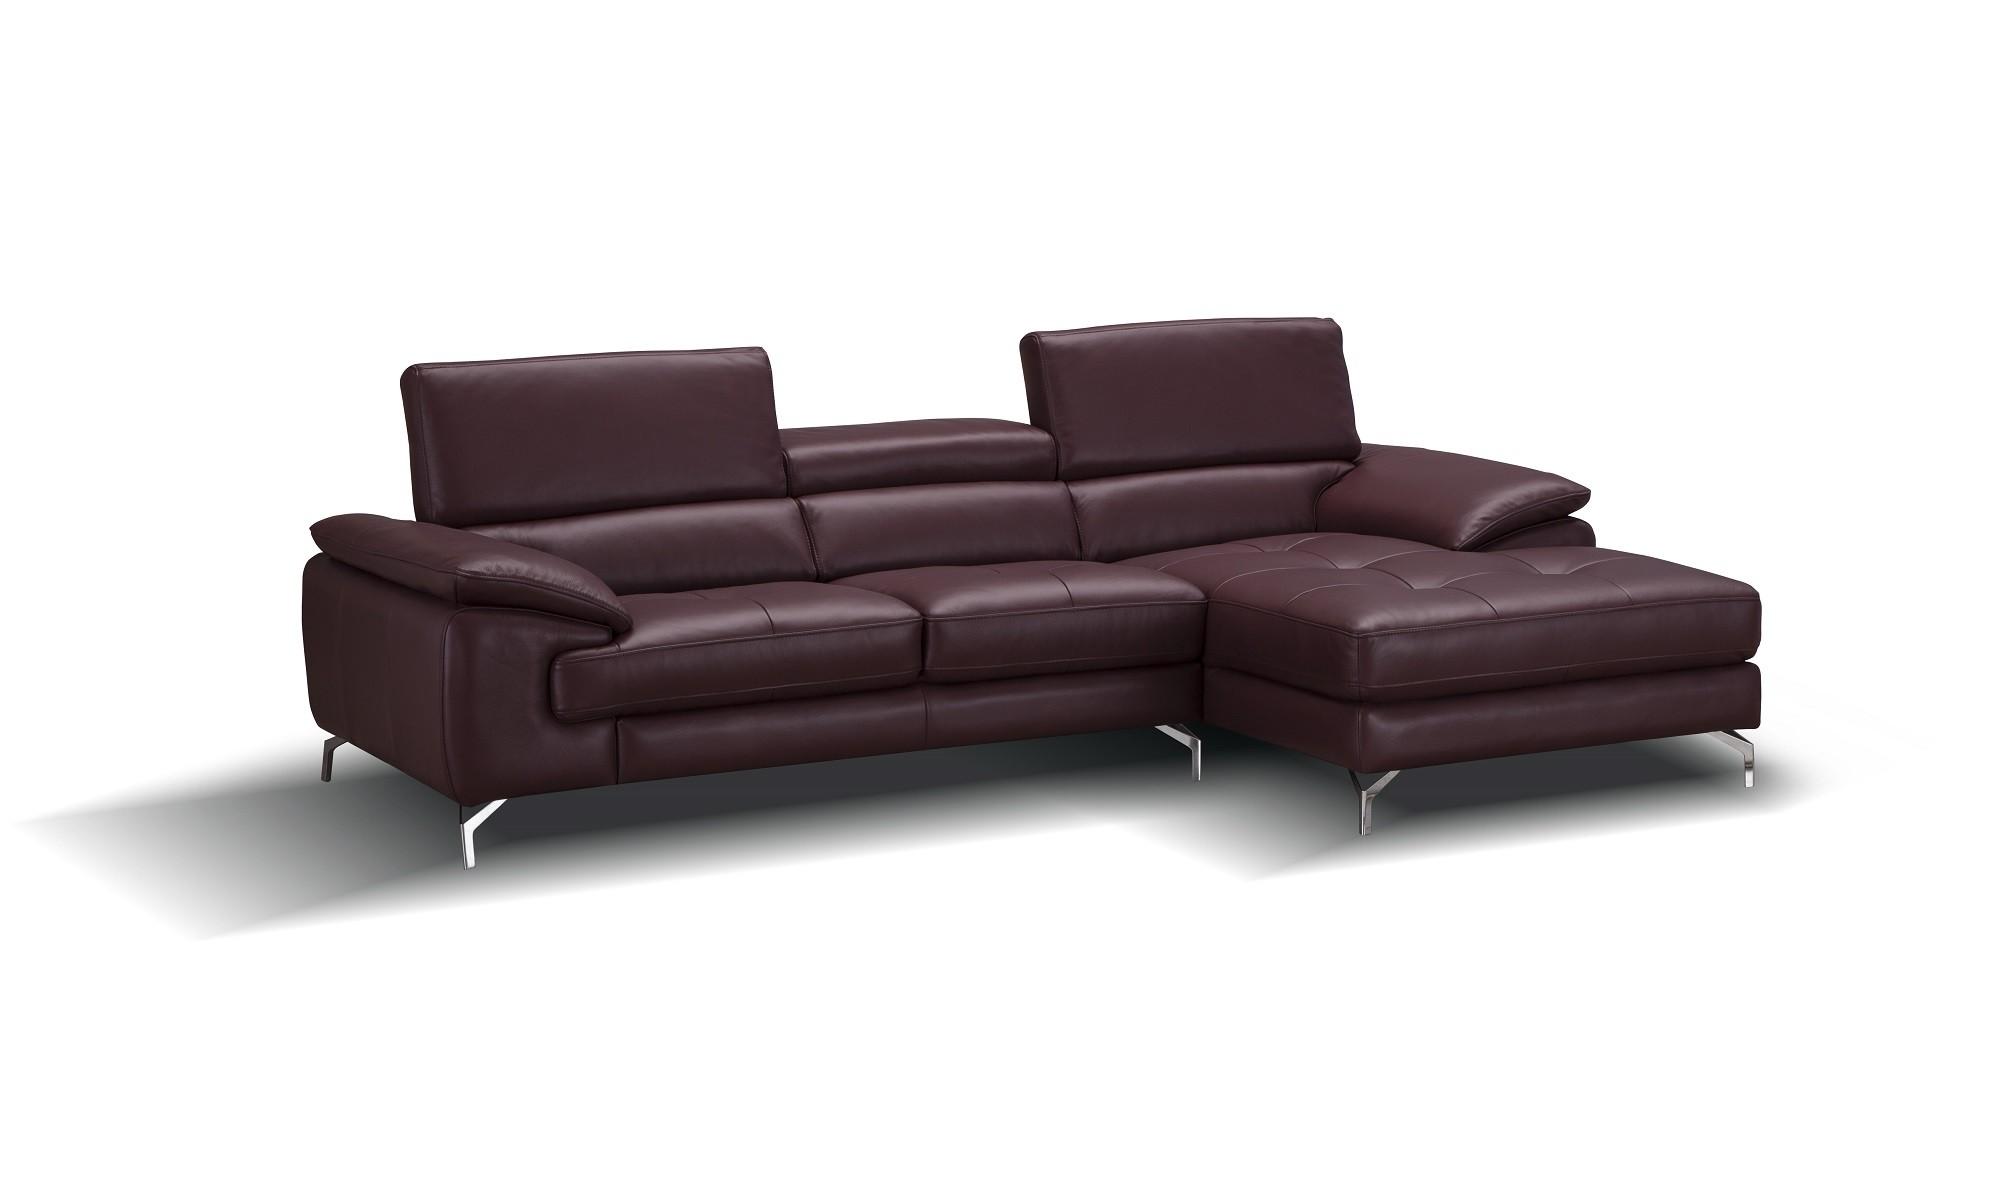 Contemporary Sectional Sofa A973b SKU 179066 in Maroon Leather